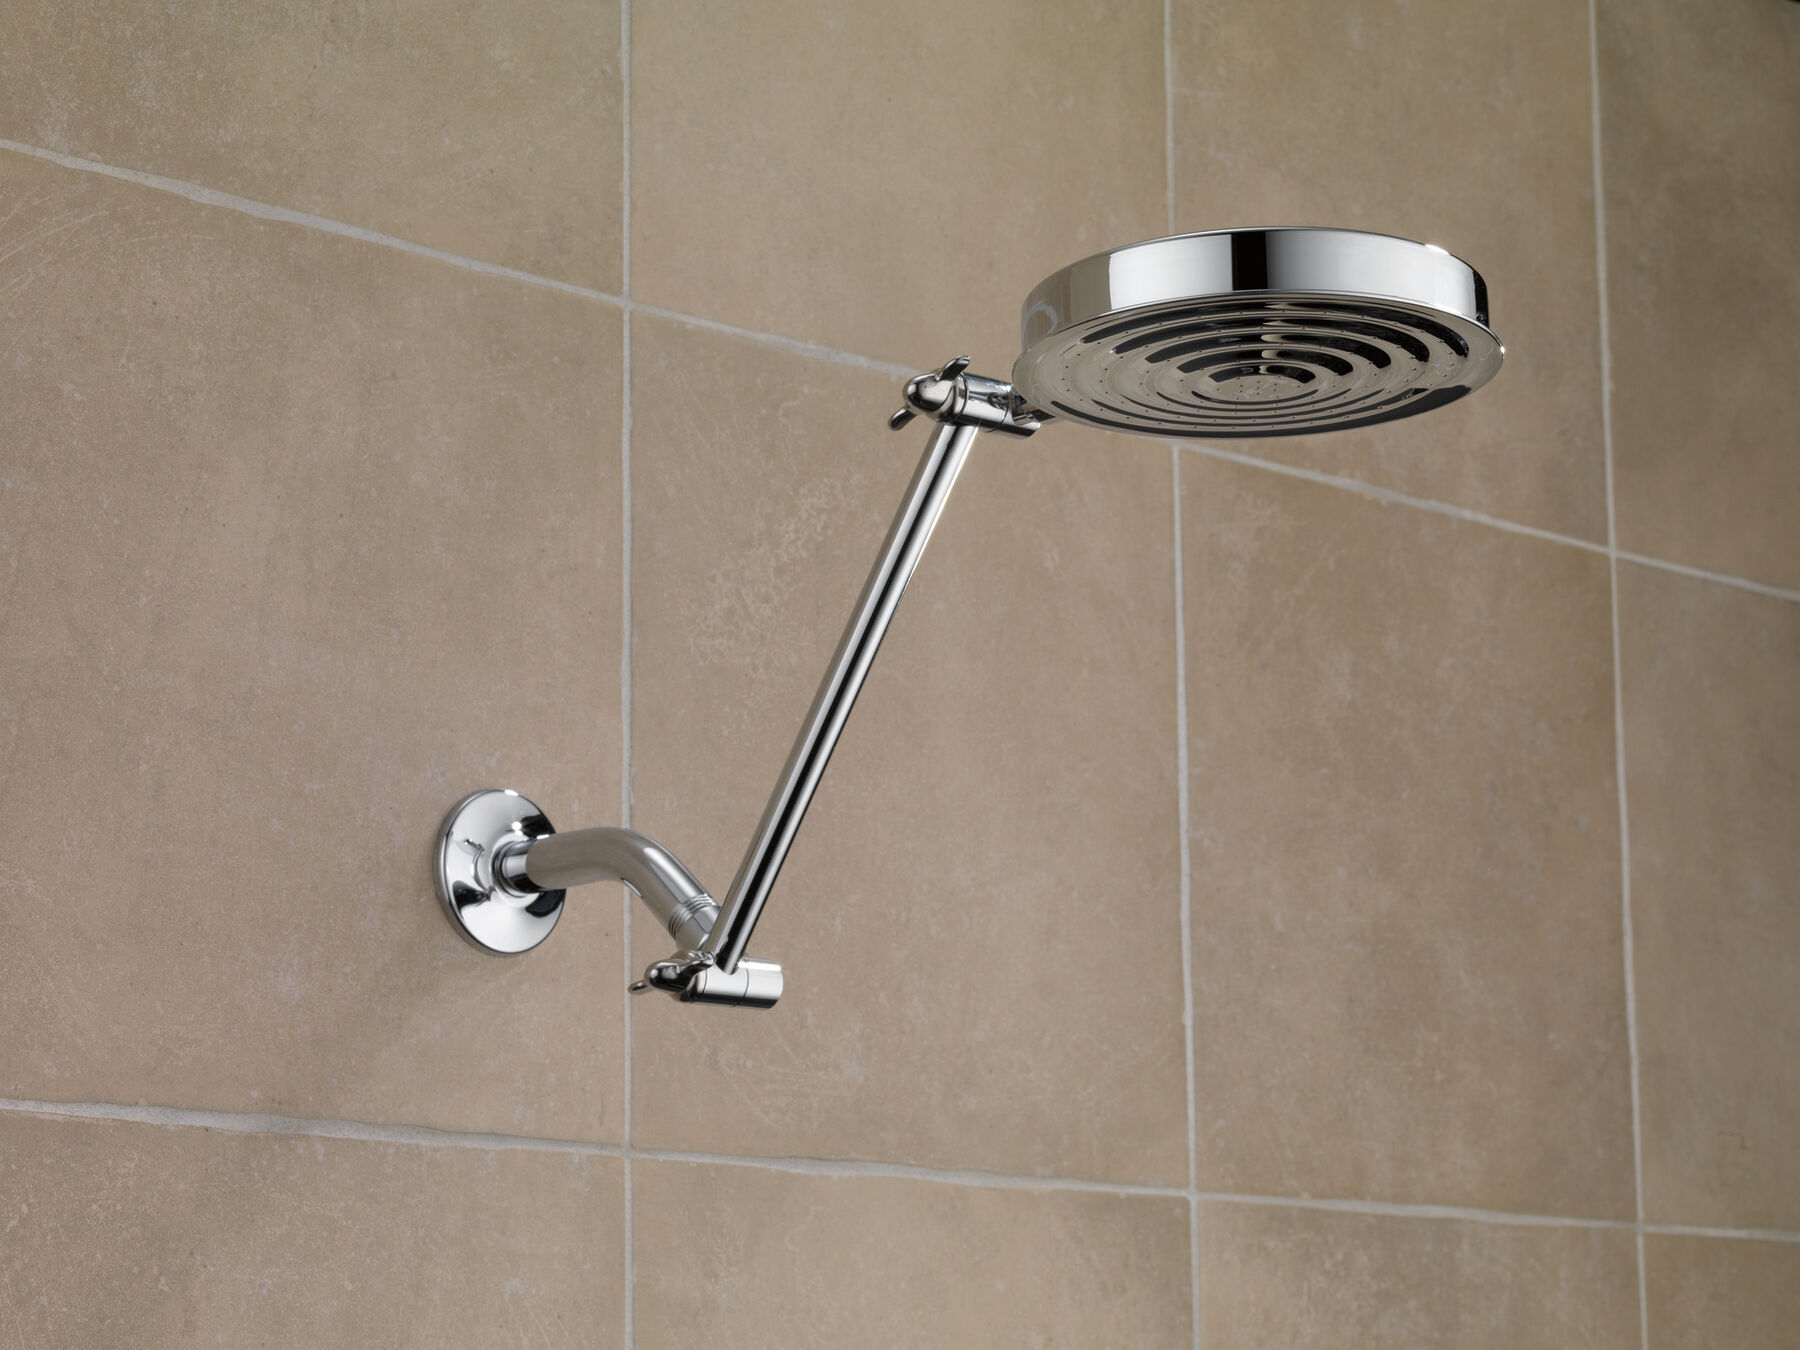 Shower Head Holder by ThreeD-Michael